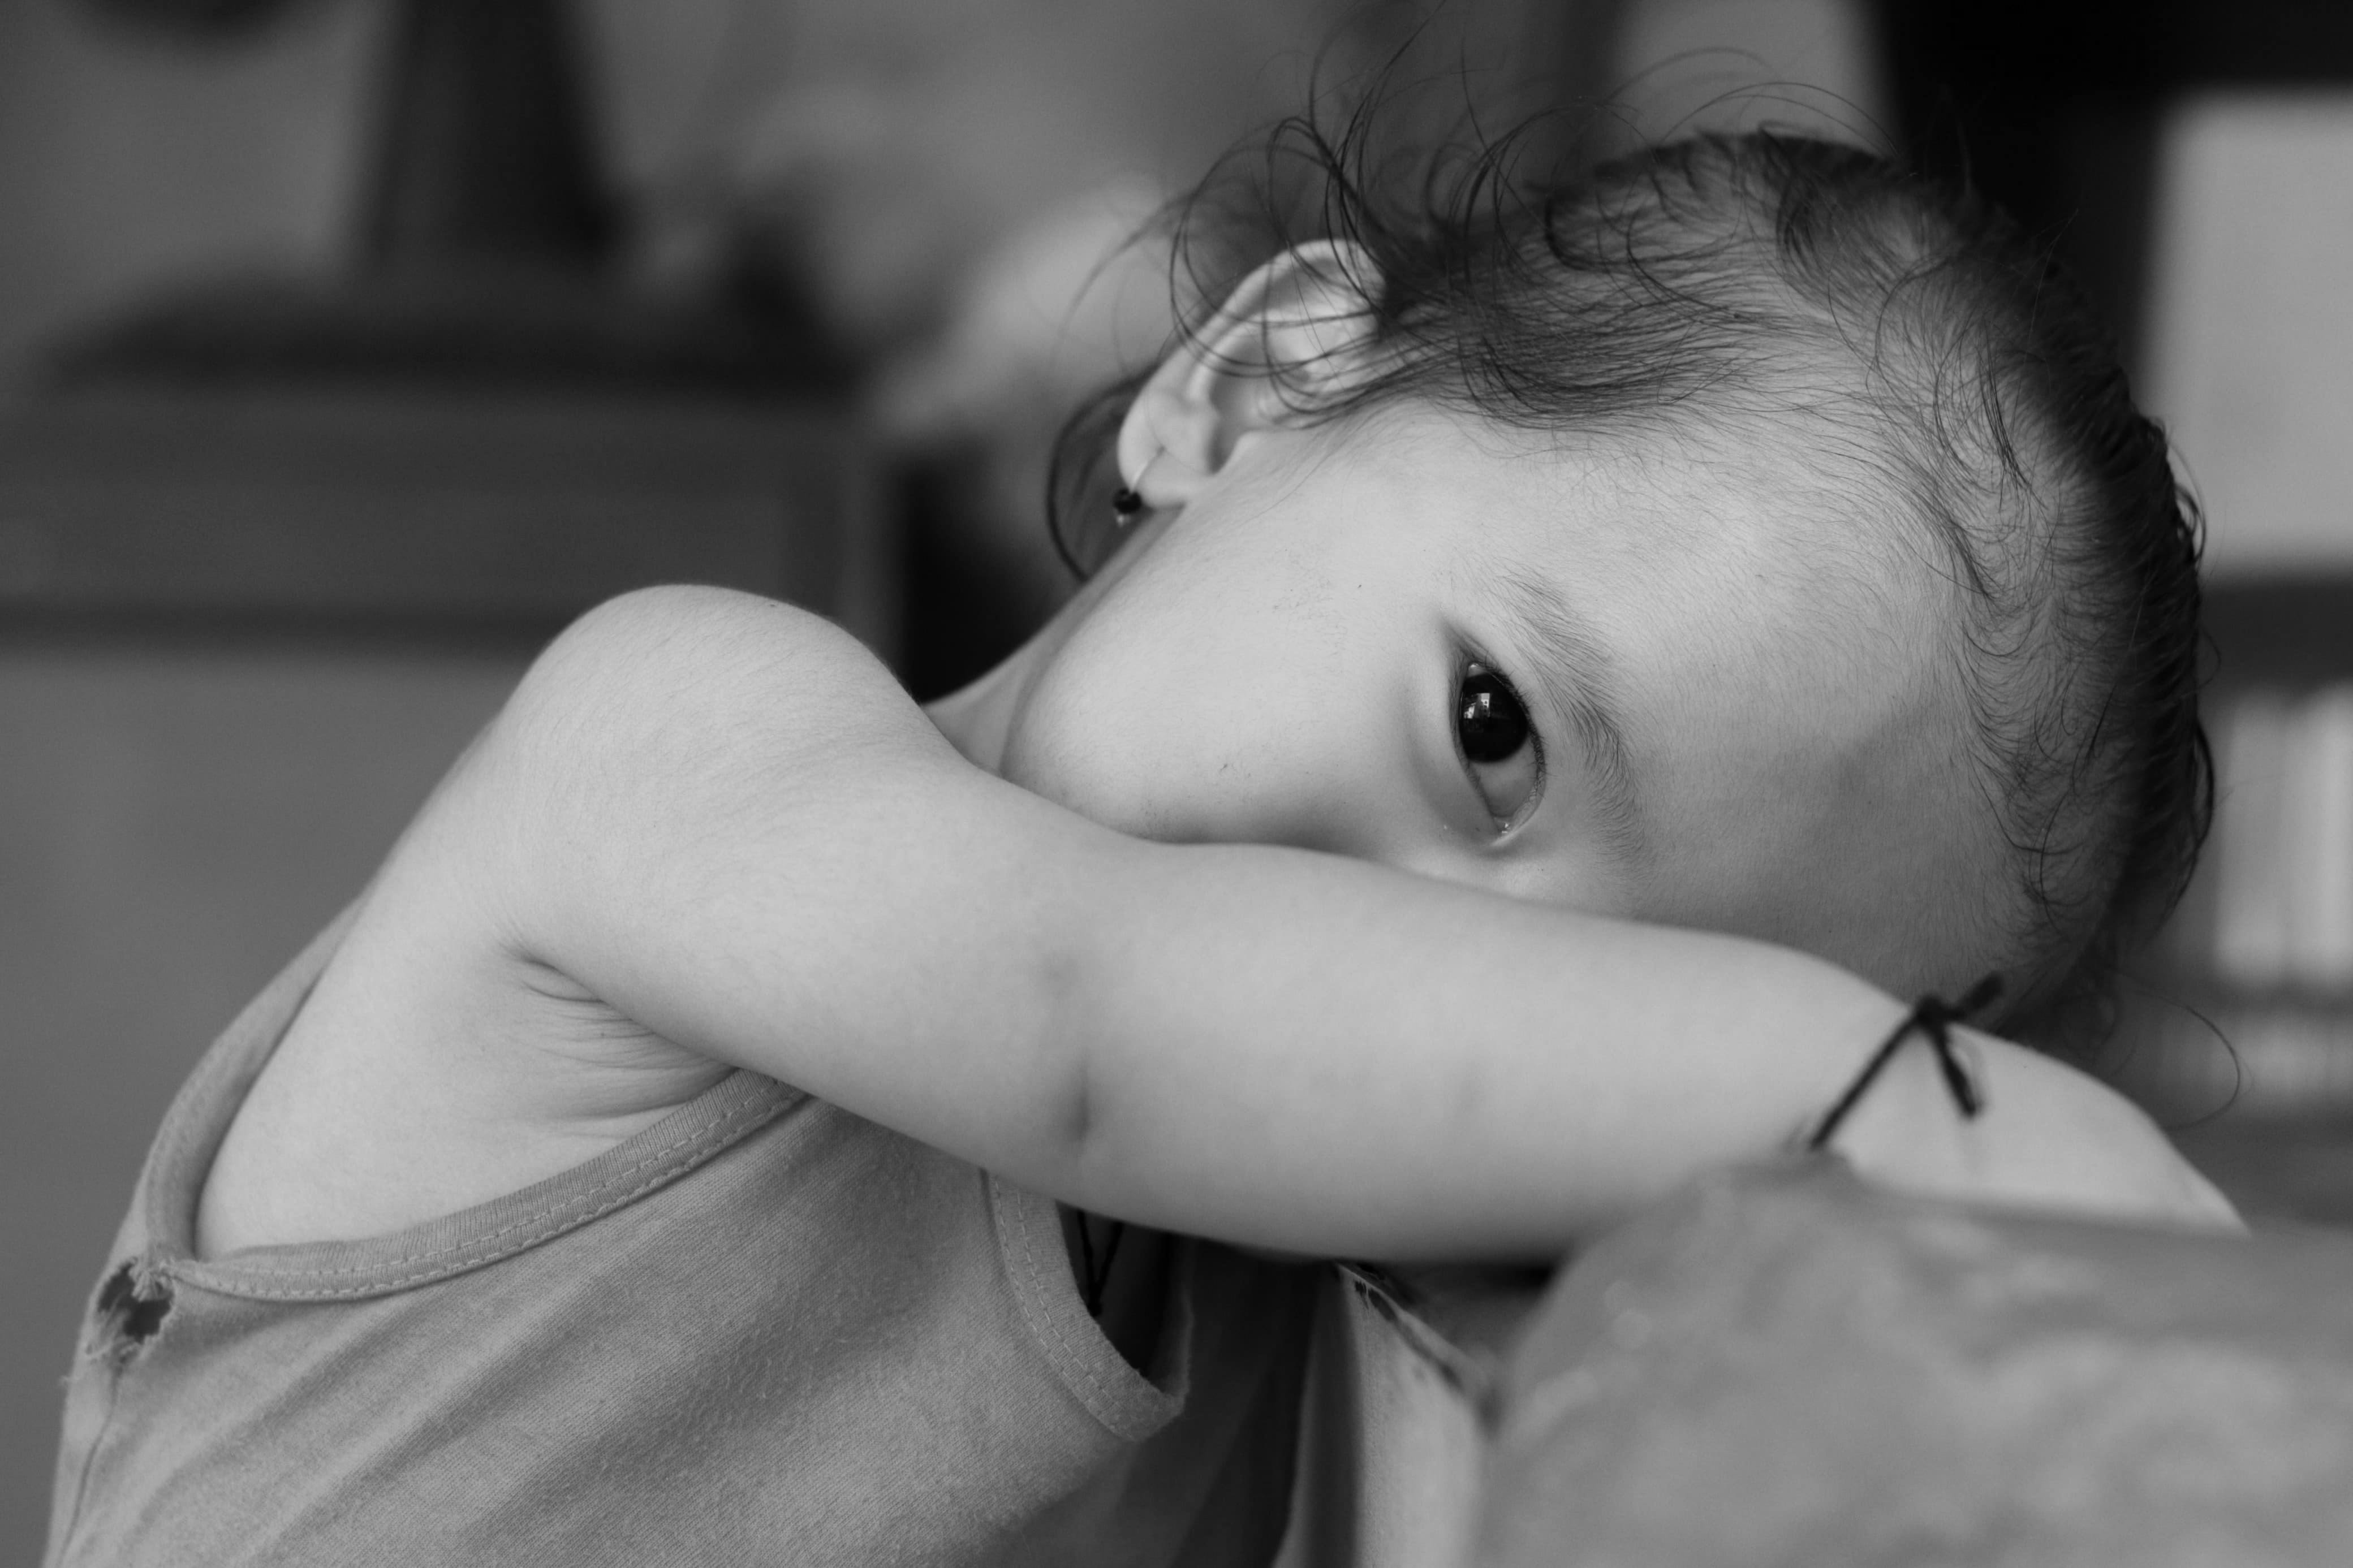 Black and white shot of a small girl | Source: Pexels